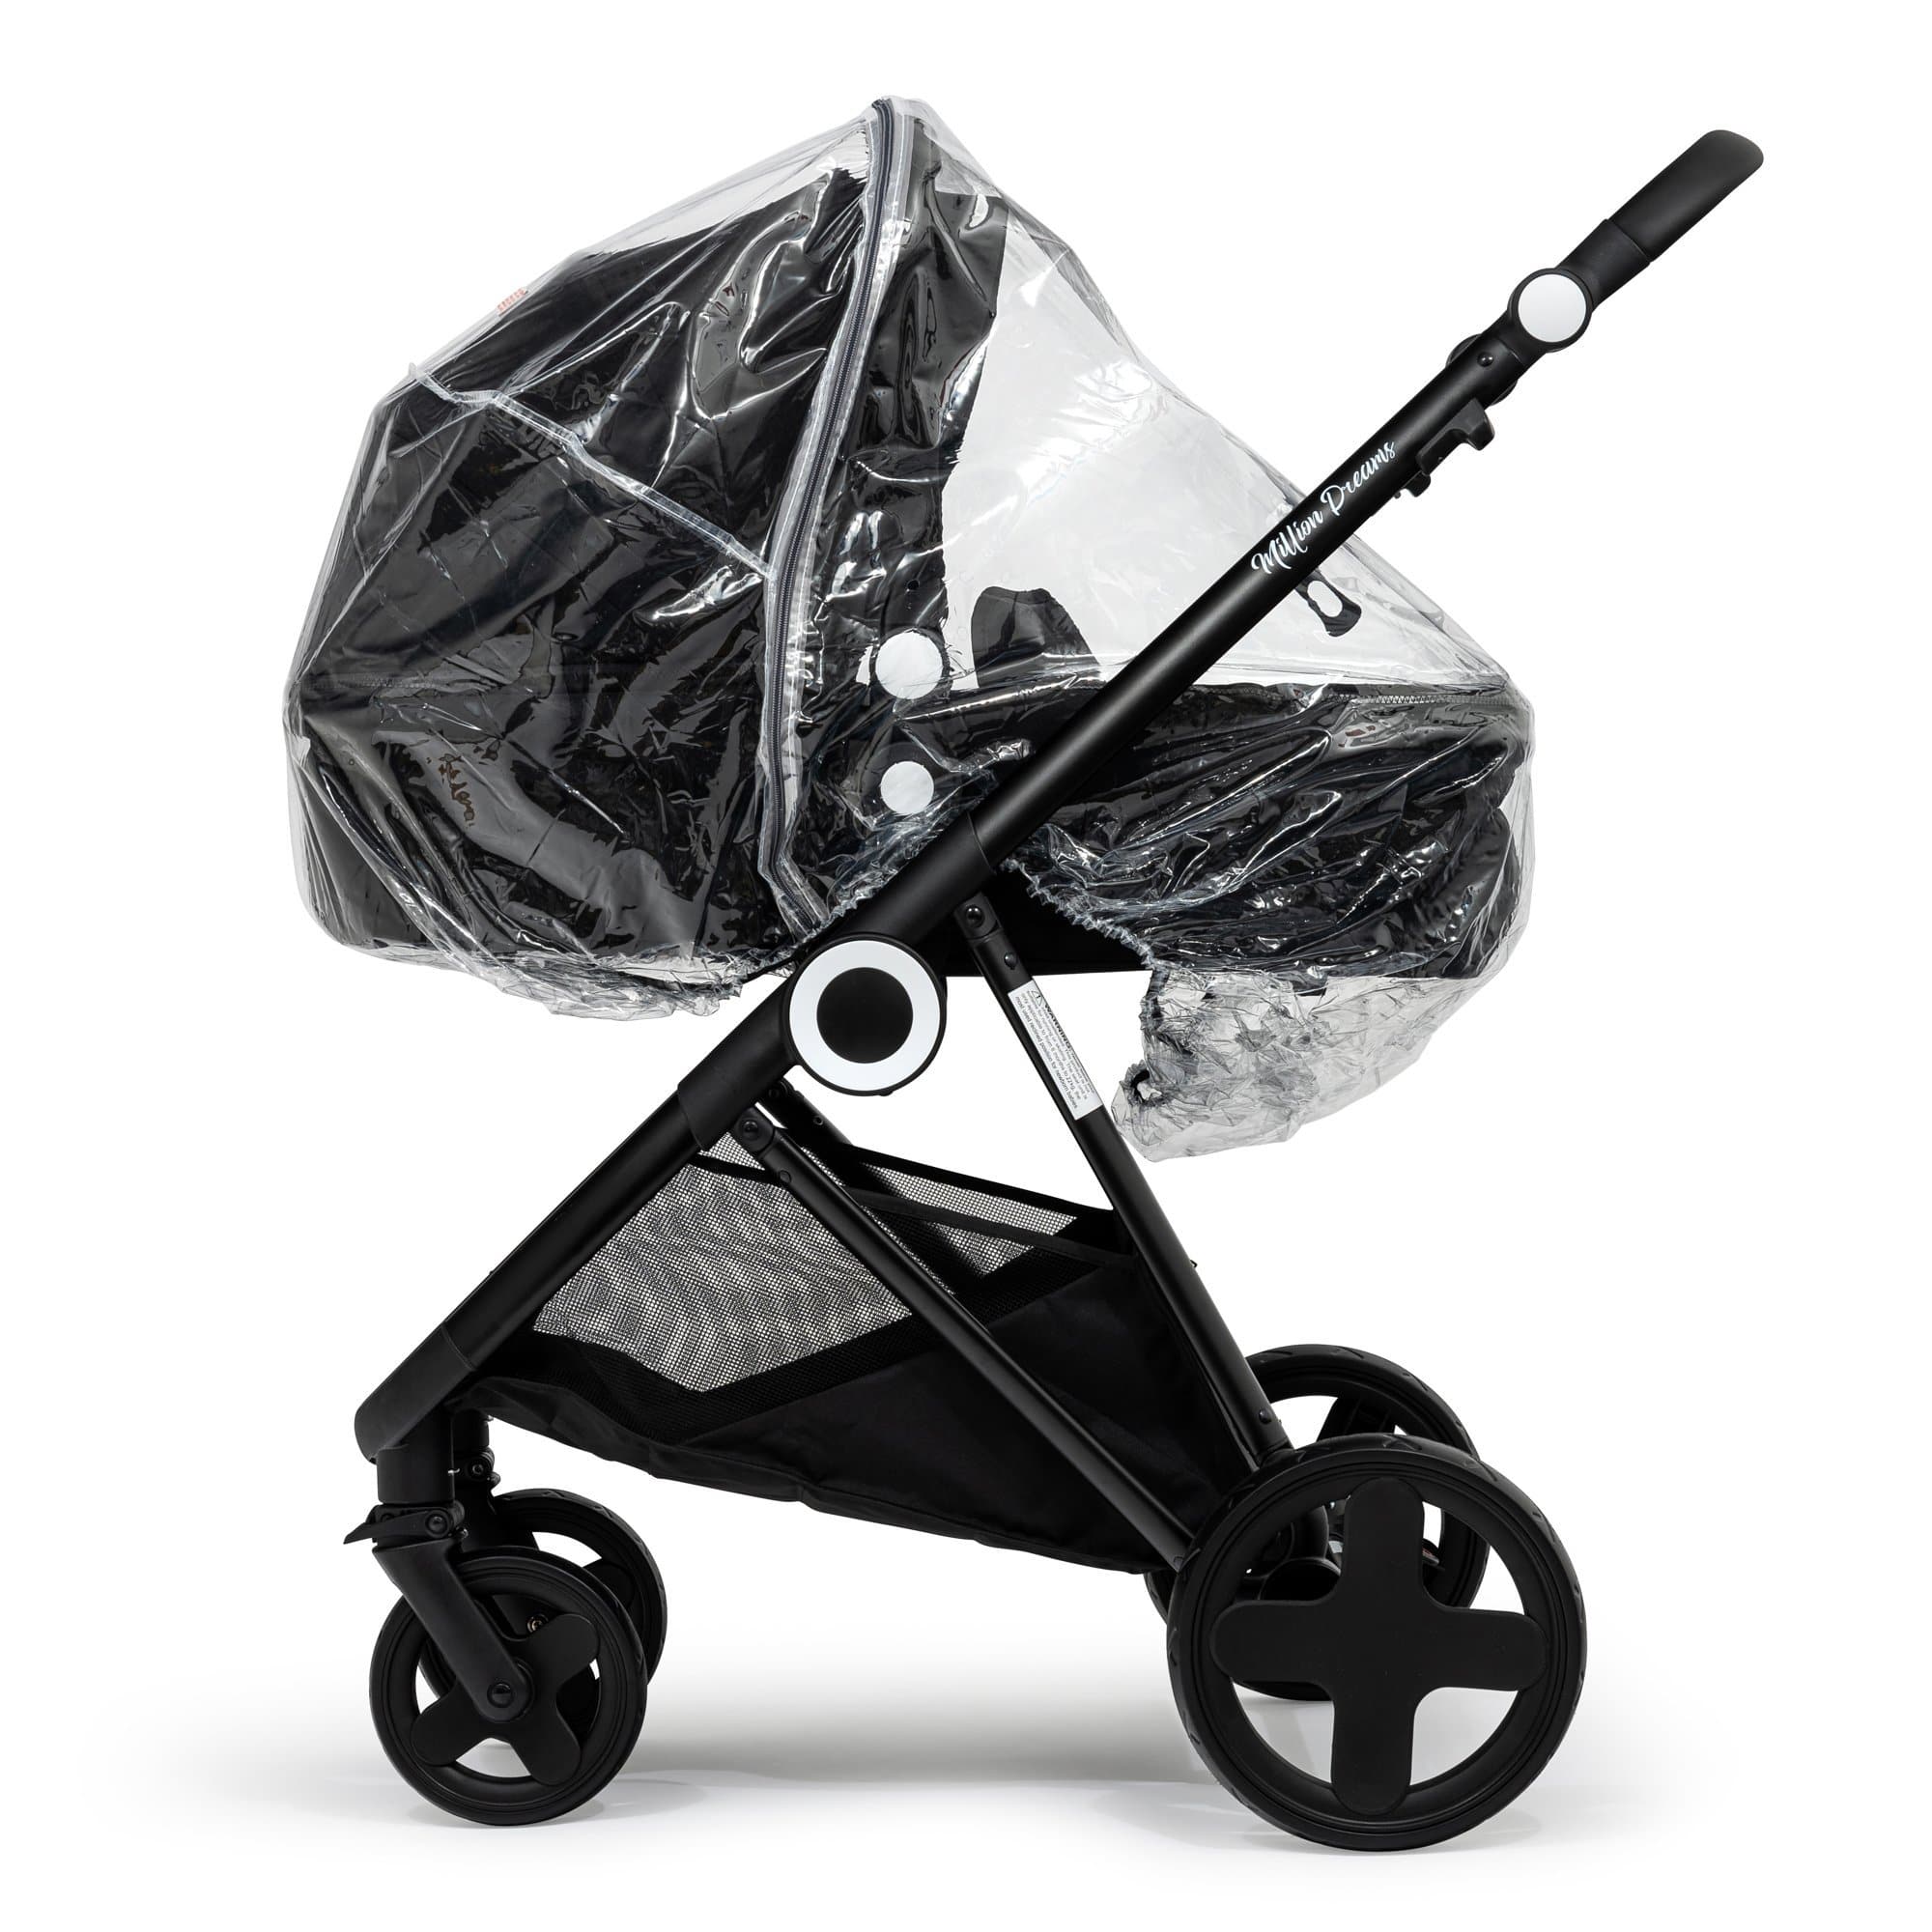 2 in 1 Rain Cover Compatible with BeSafe - Fits All Models - For Your Little One